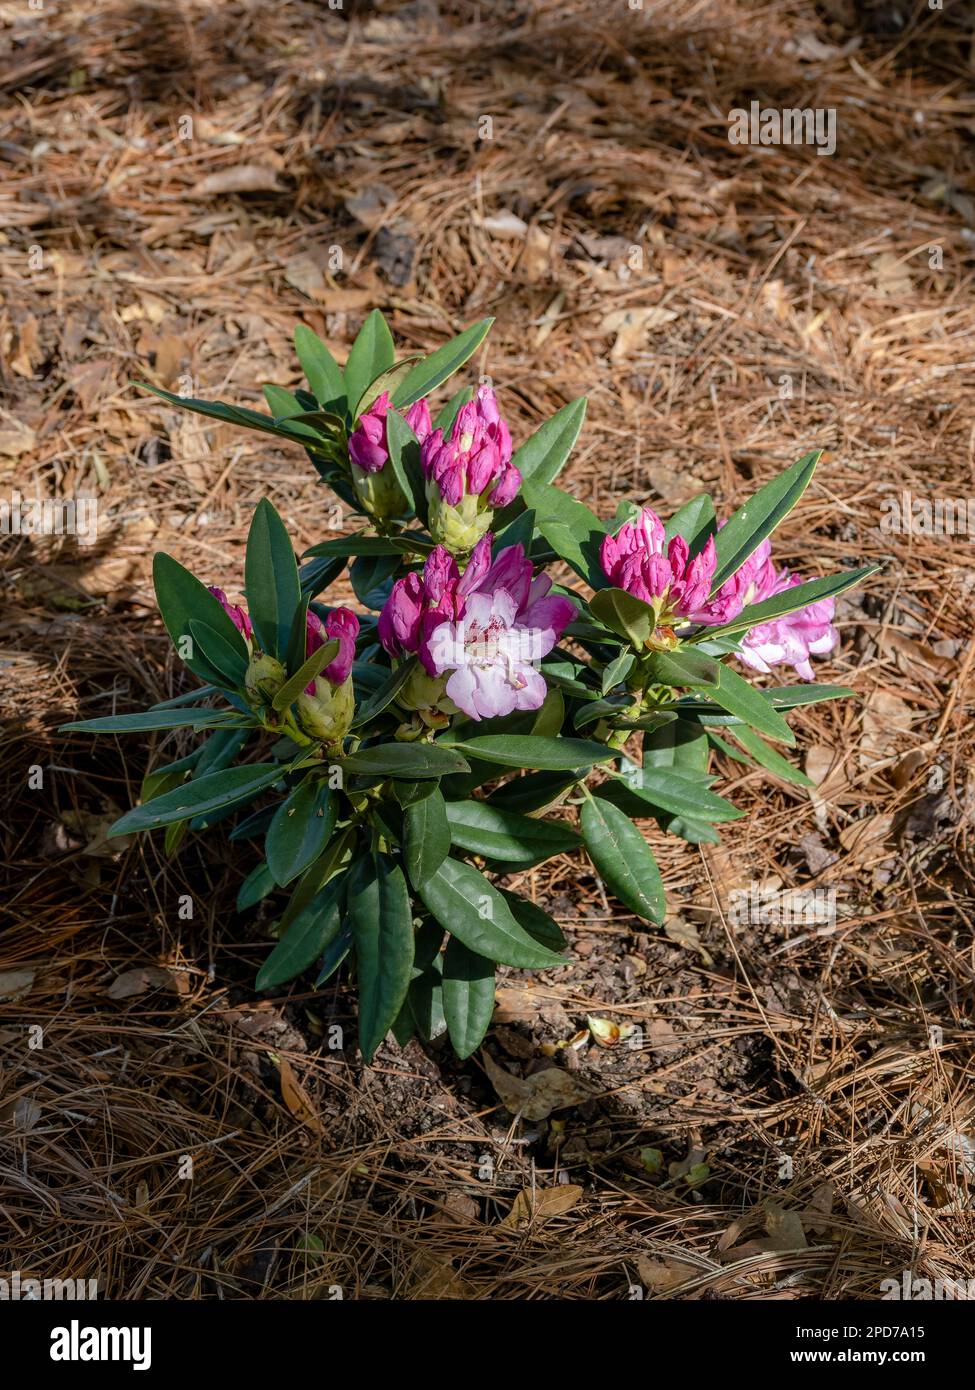 Radiance Southgate Rhododendron plant with pink and white flowers or blooms, flowering or blooming in spring in Alabama, USA. Stock Photo